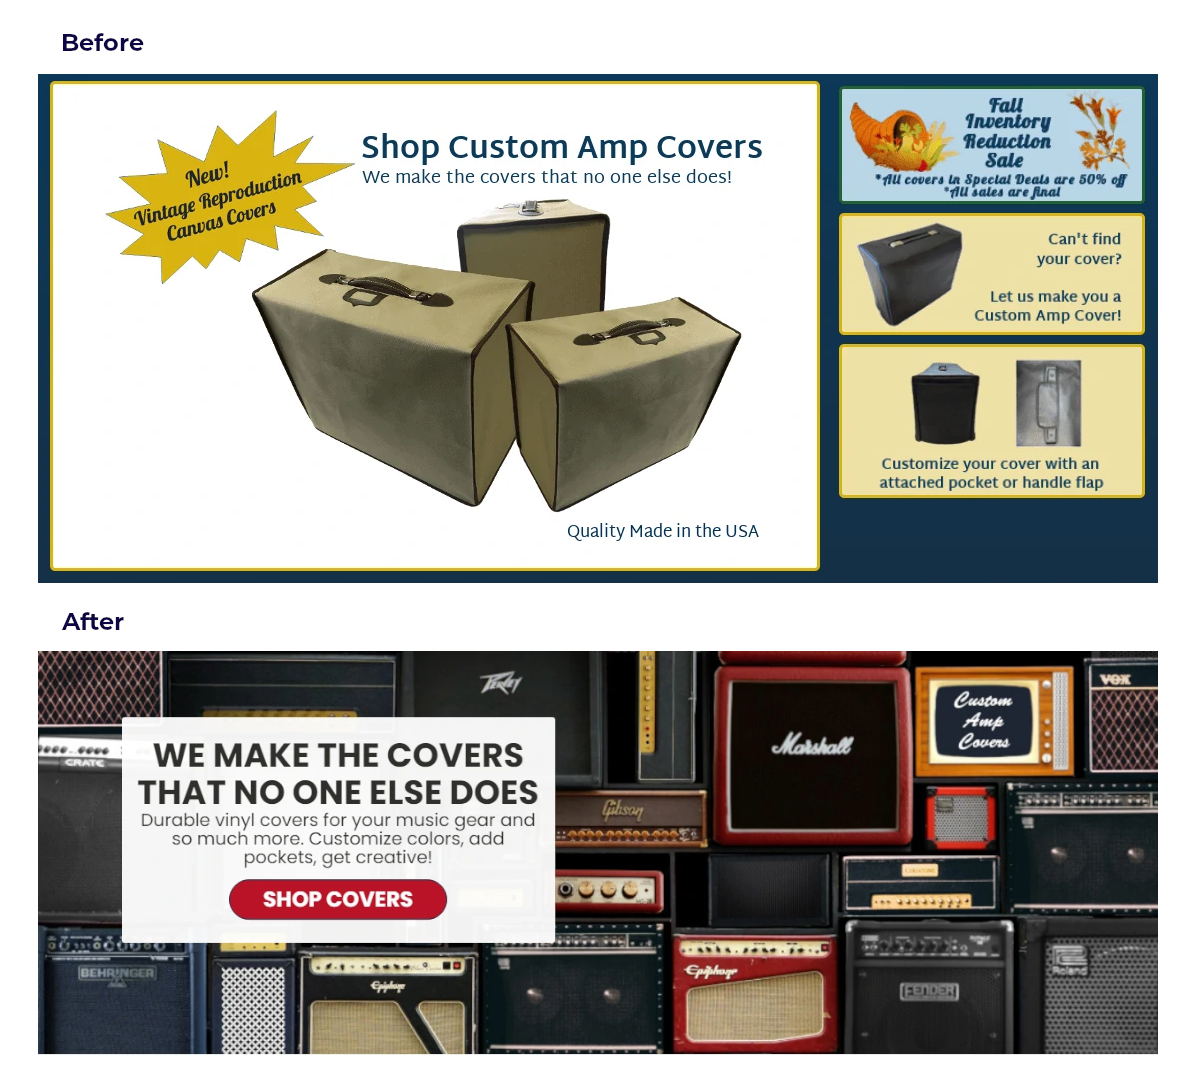 Custom Amp Covers home page before